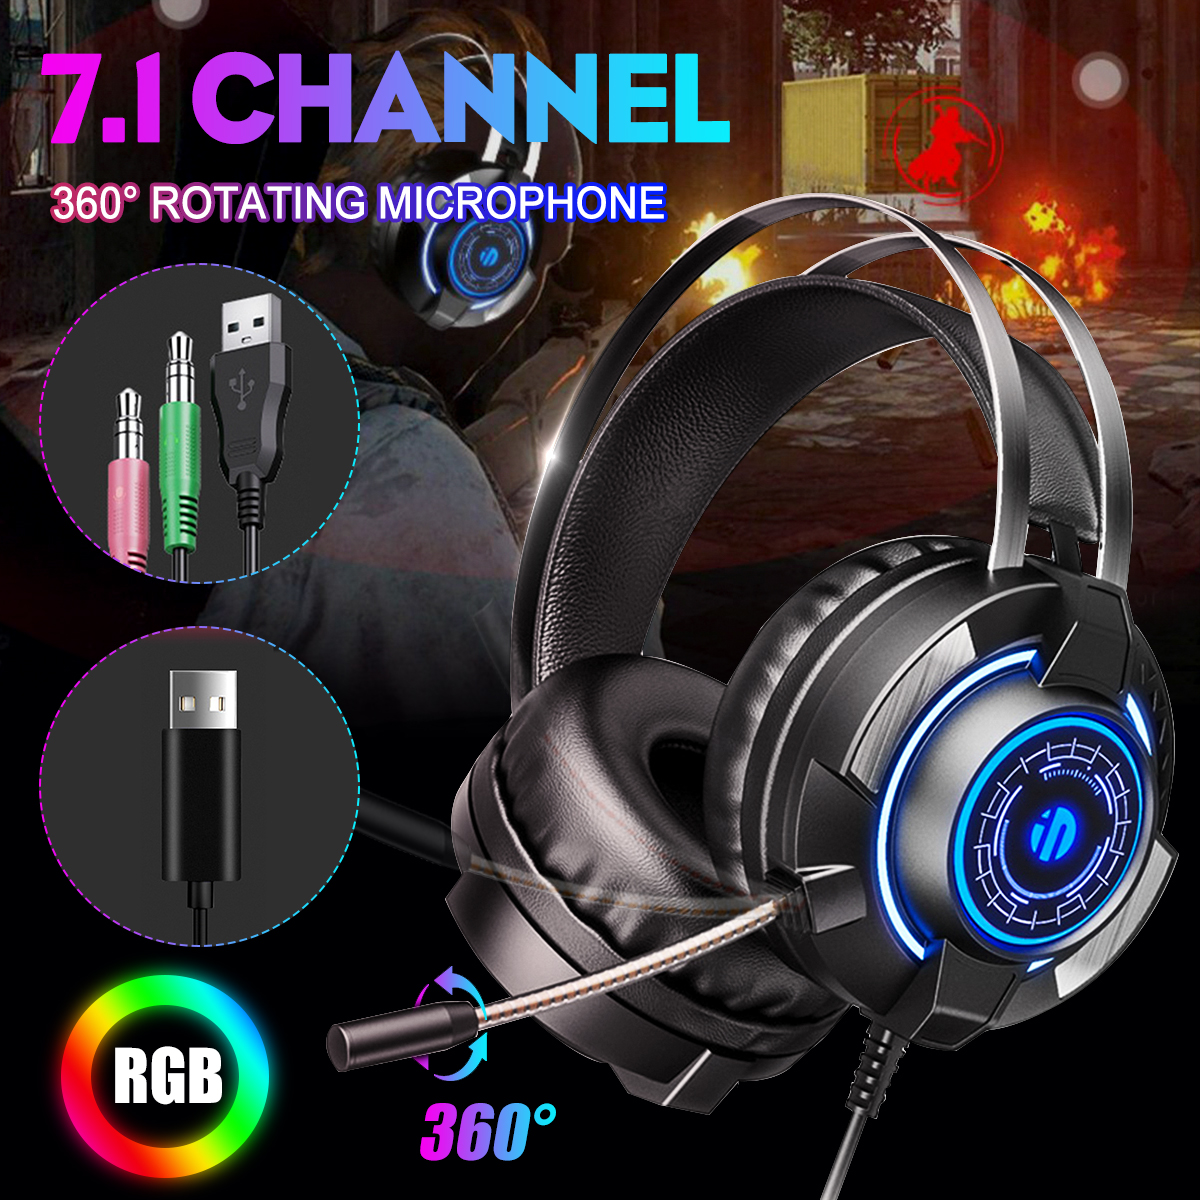 G2-Gaming-Headset-RGB-Light-Head-Mounted-Wired-Headset-For-Desktop-Computers-Laptops-1795933-1